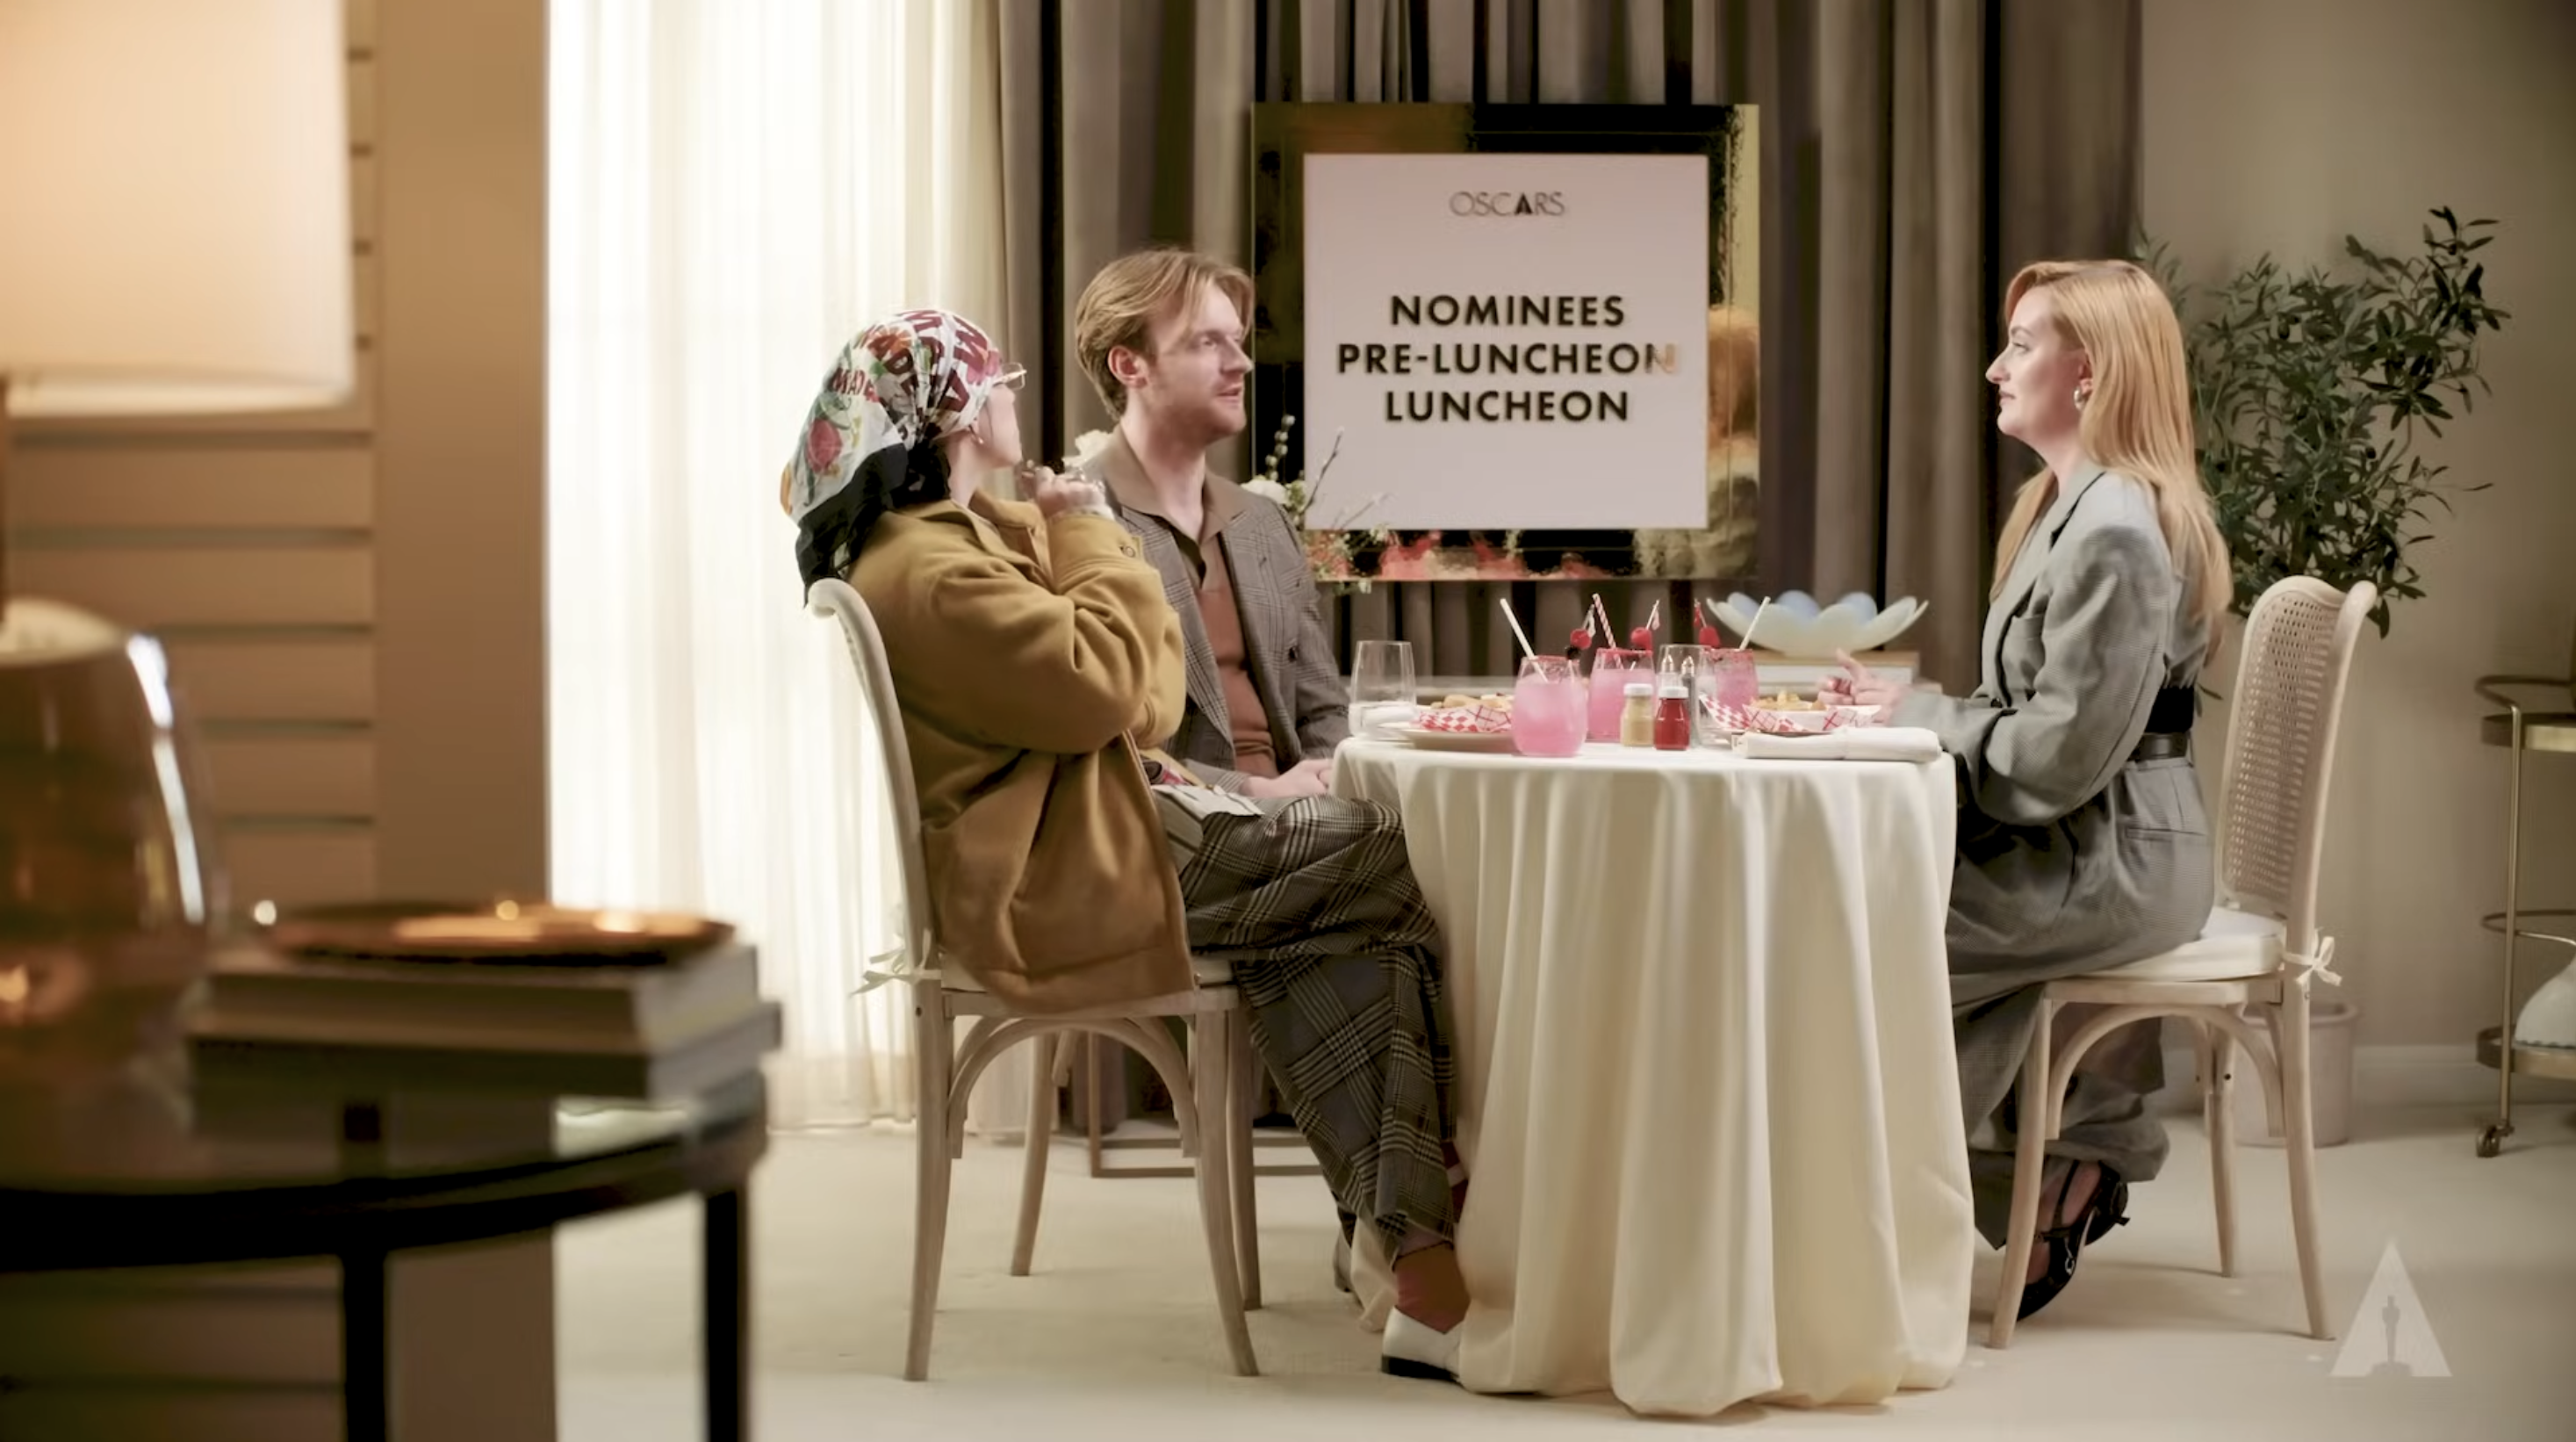 The three seated at a table with drinks and decor, including a sign that reads &quot;Oscars Nominees Pre-Luncheon&quot;